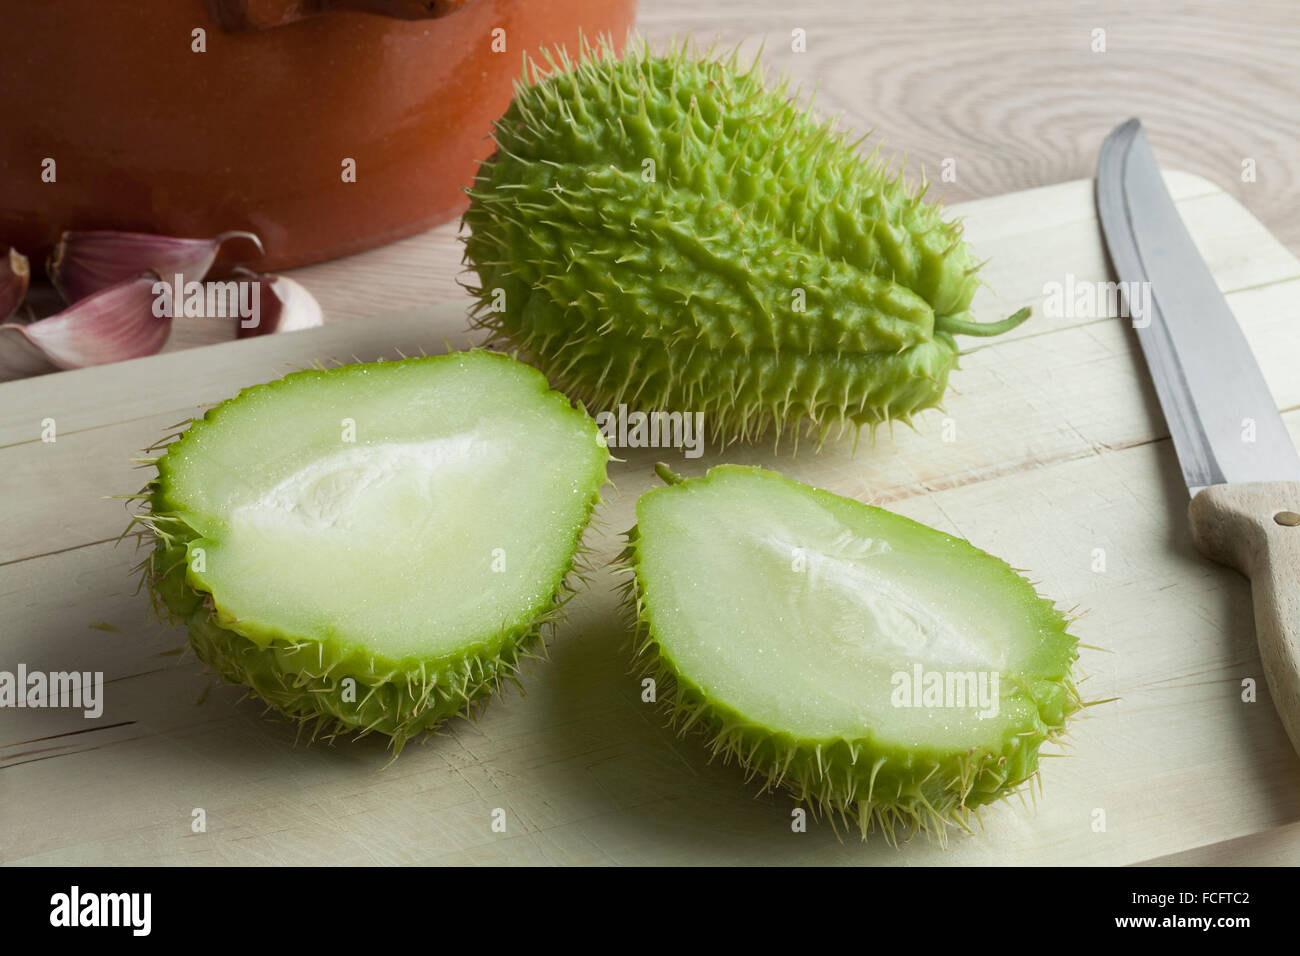 Whole and half spined fresh chayote fruit on a cutting board Stock Photo